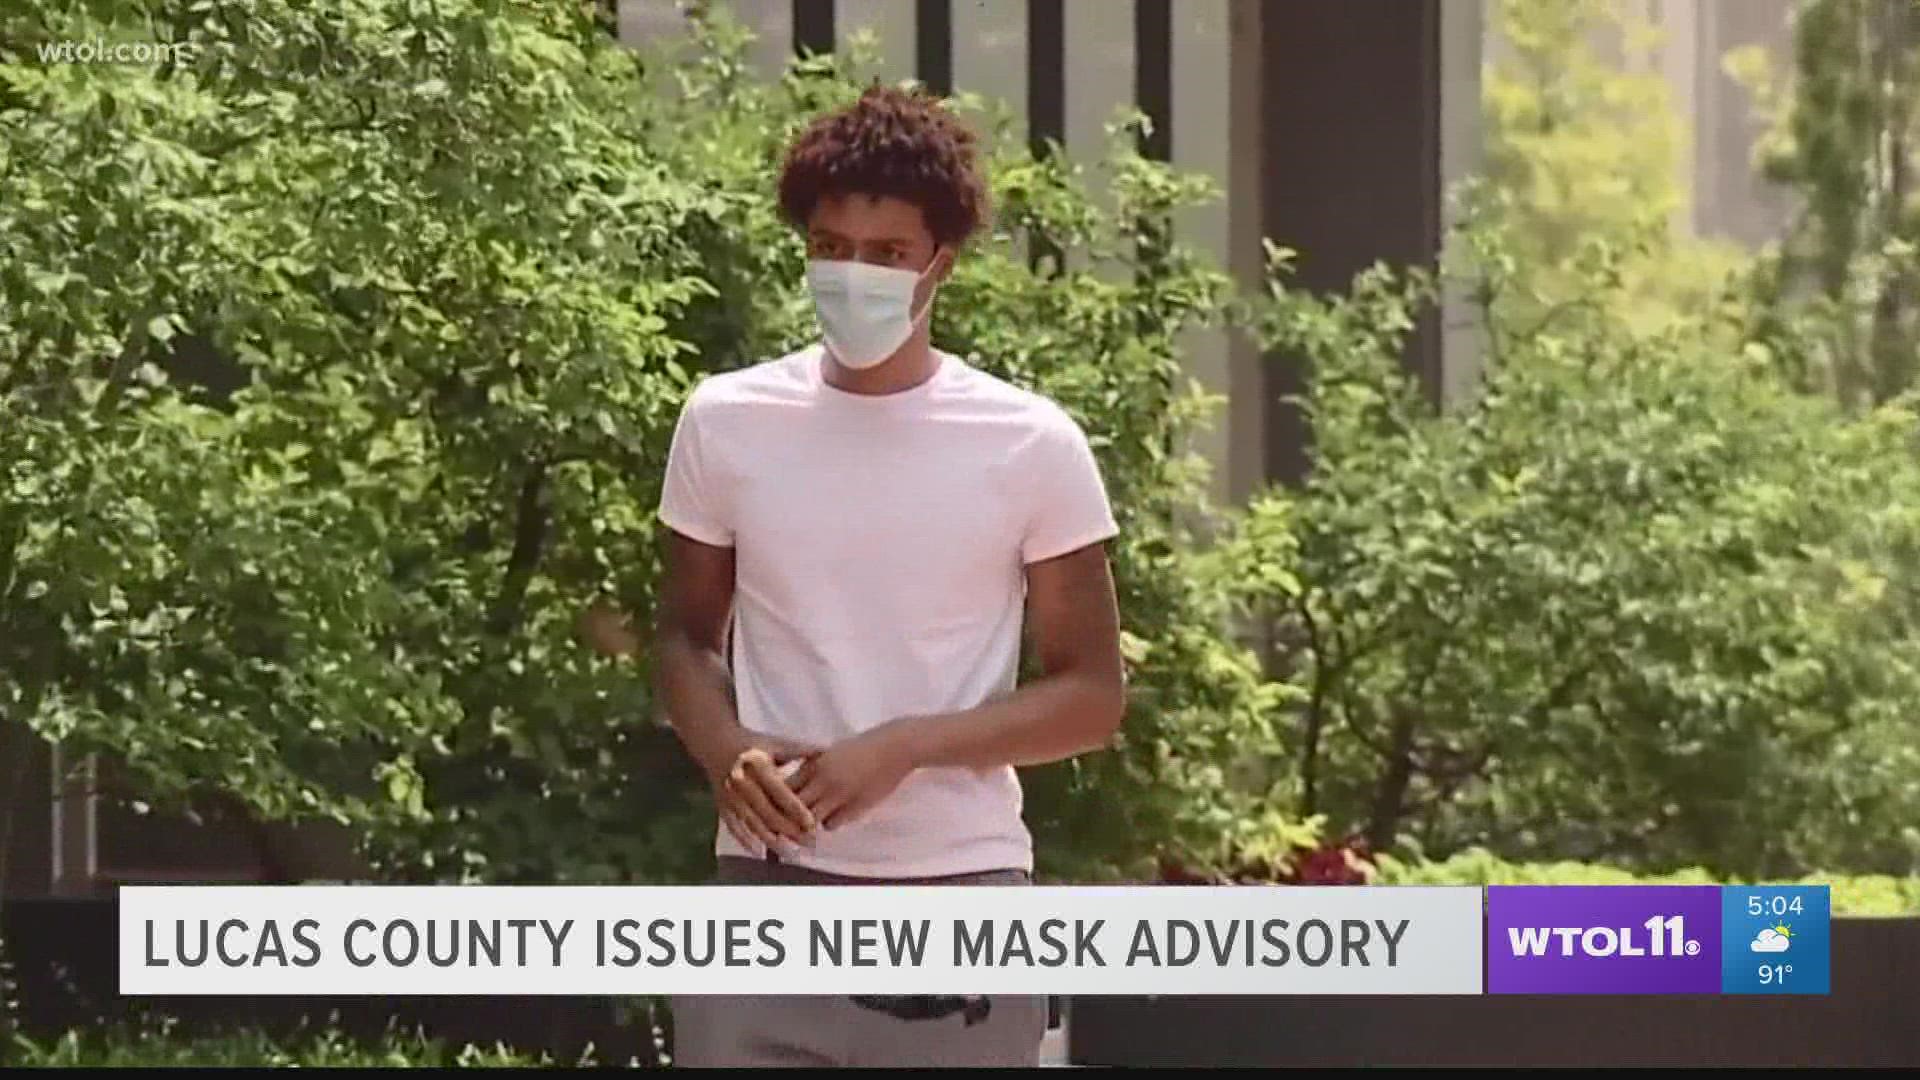 The health department recommends that everyone should wear a mask indoors and at crowded outdoor events, regardless of vaccination status.